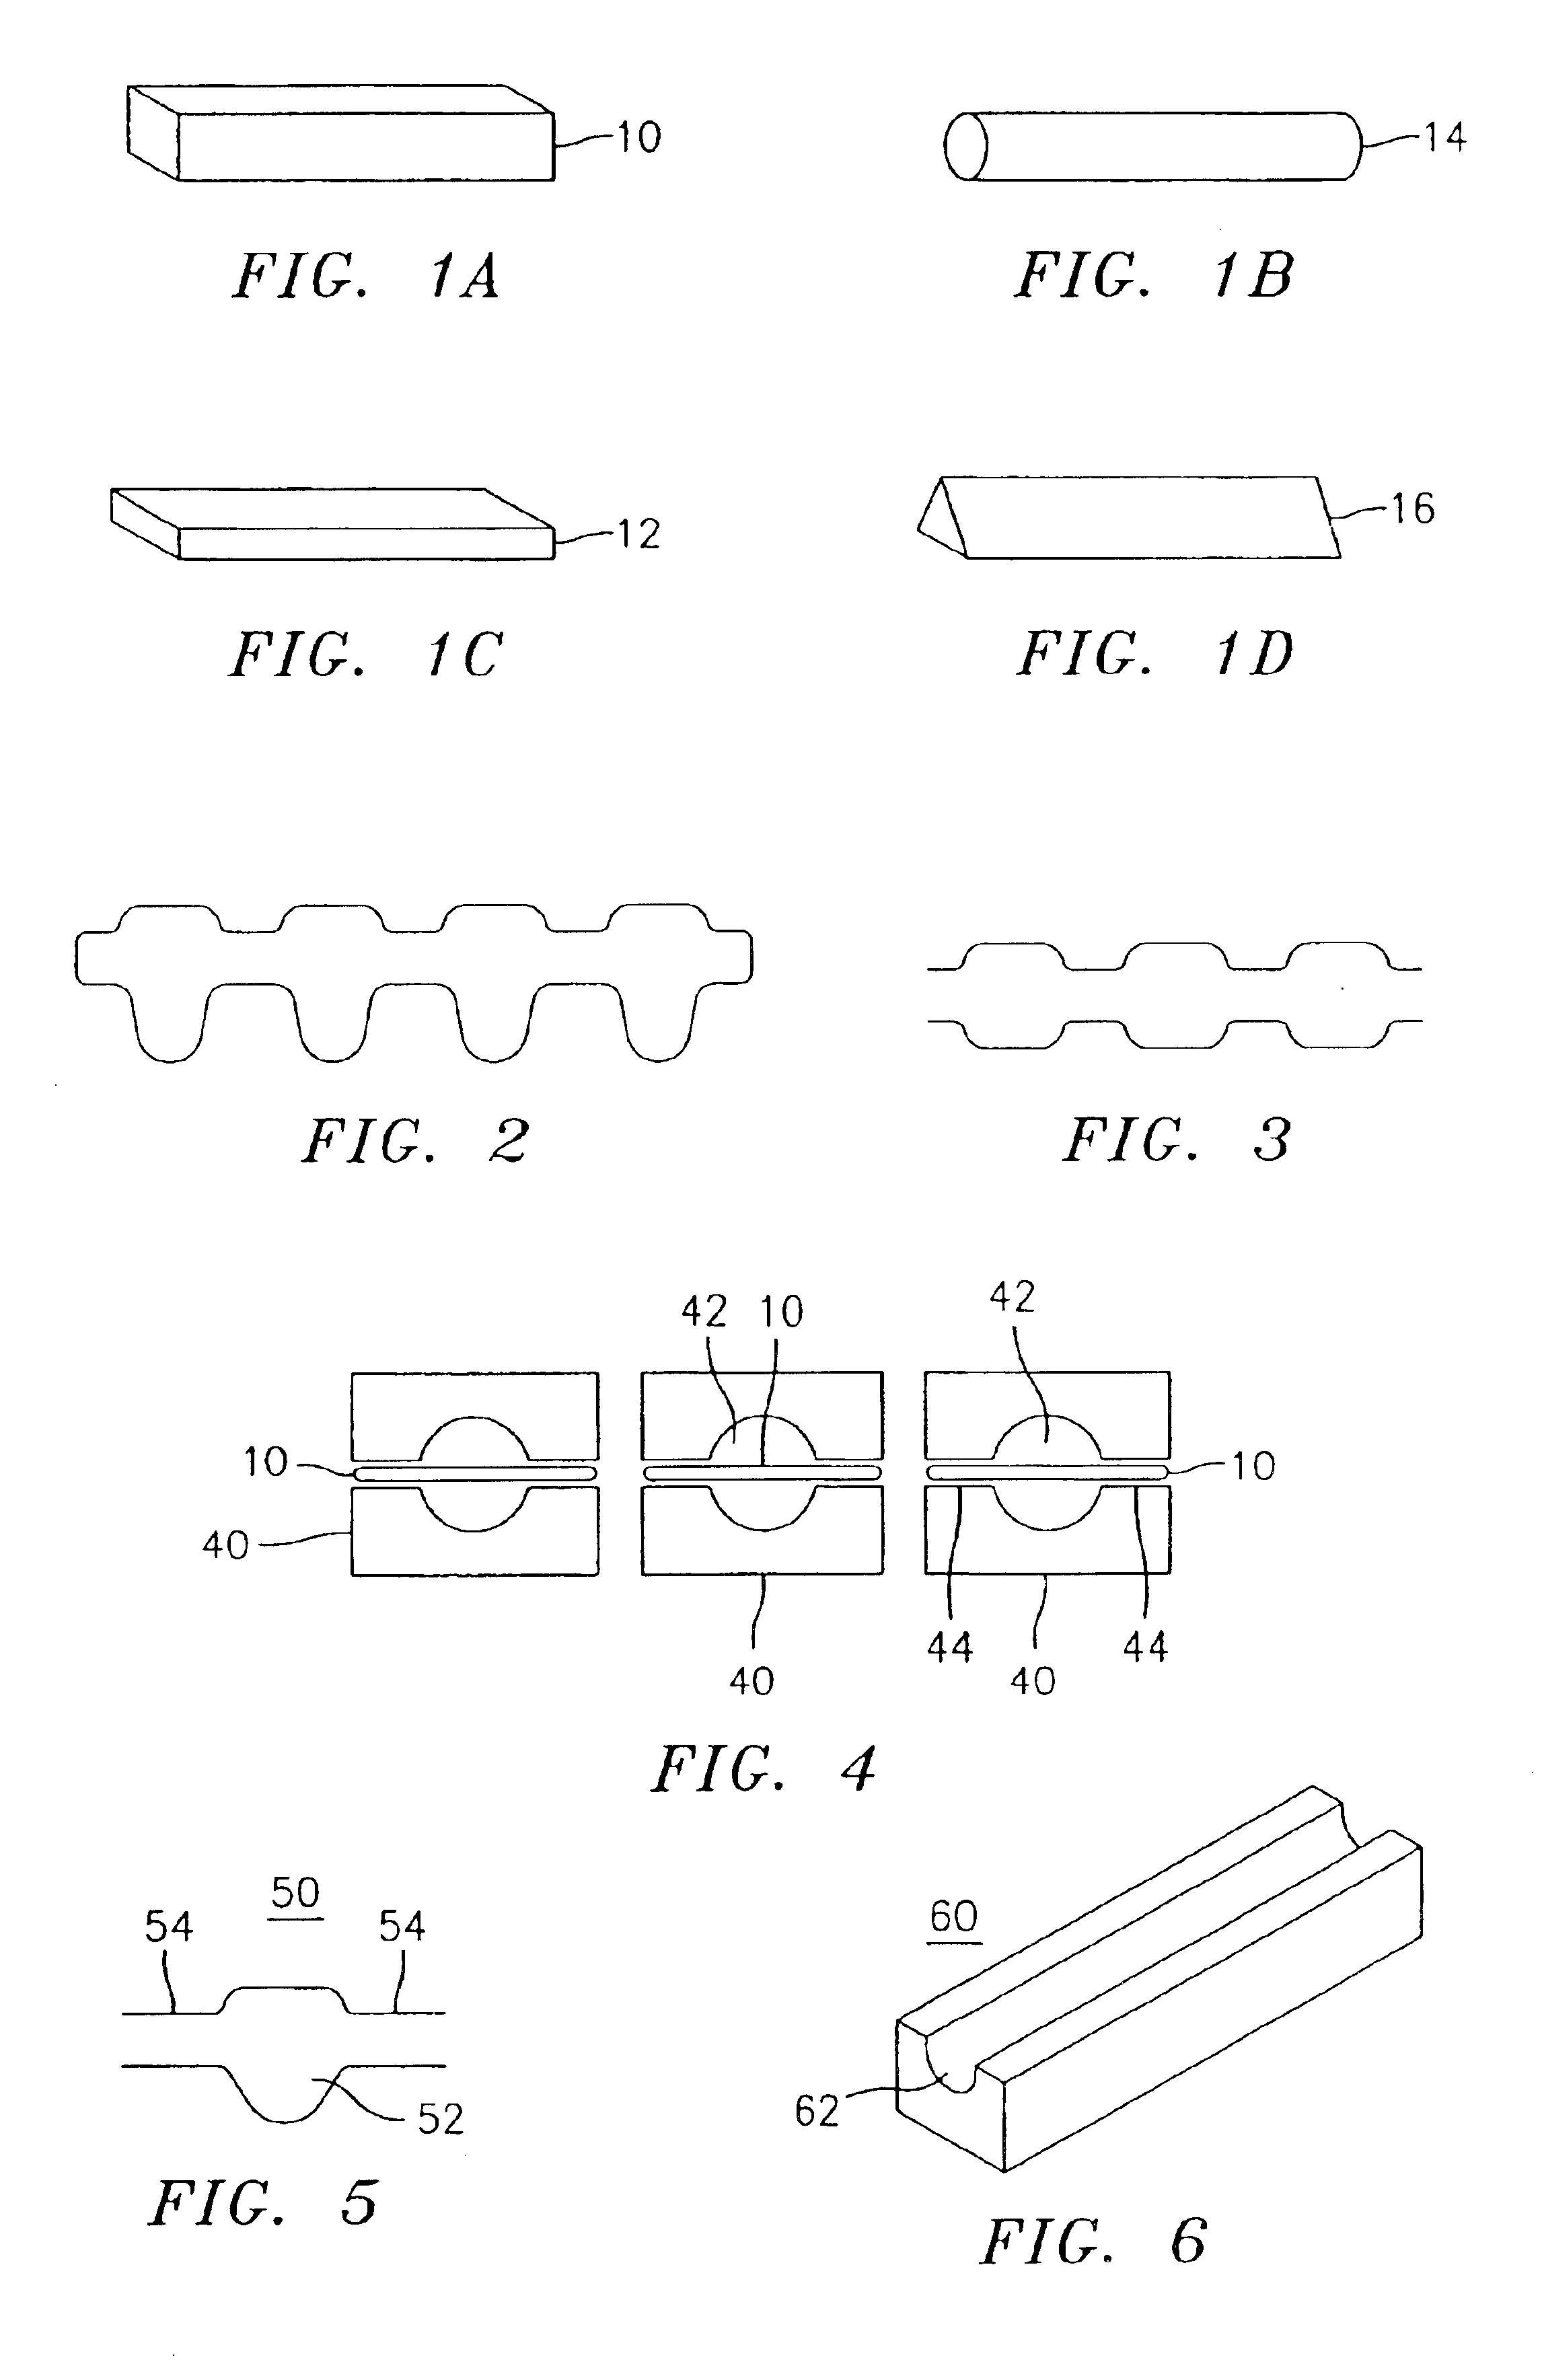 Prefabricated components for dental appliances